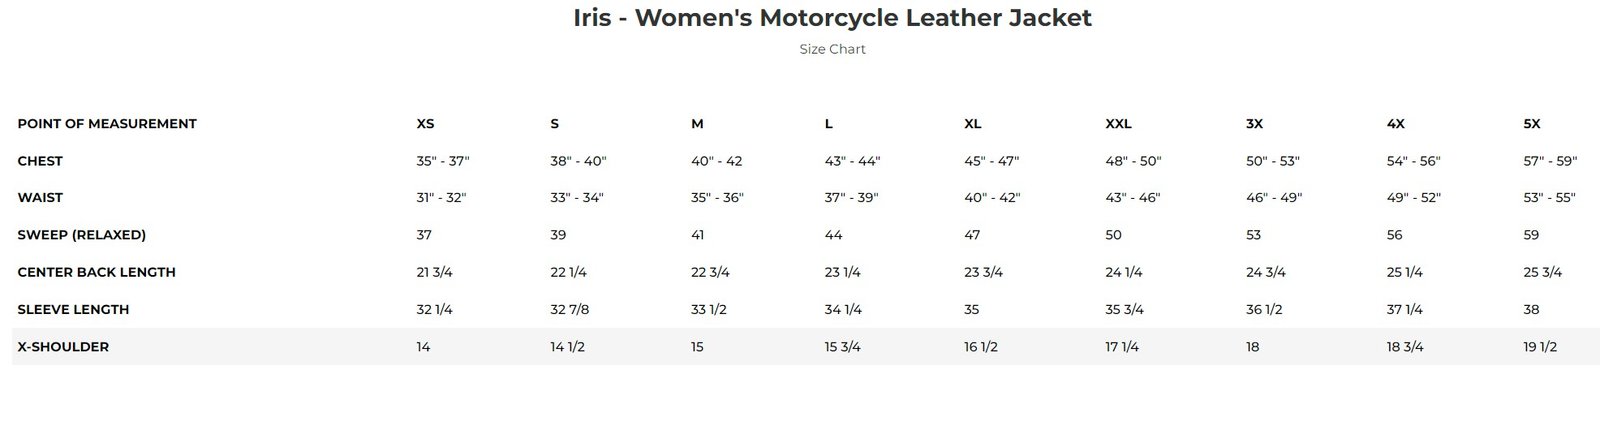 Size chart for IRIS, women's leather motorcycle jacket with purple.